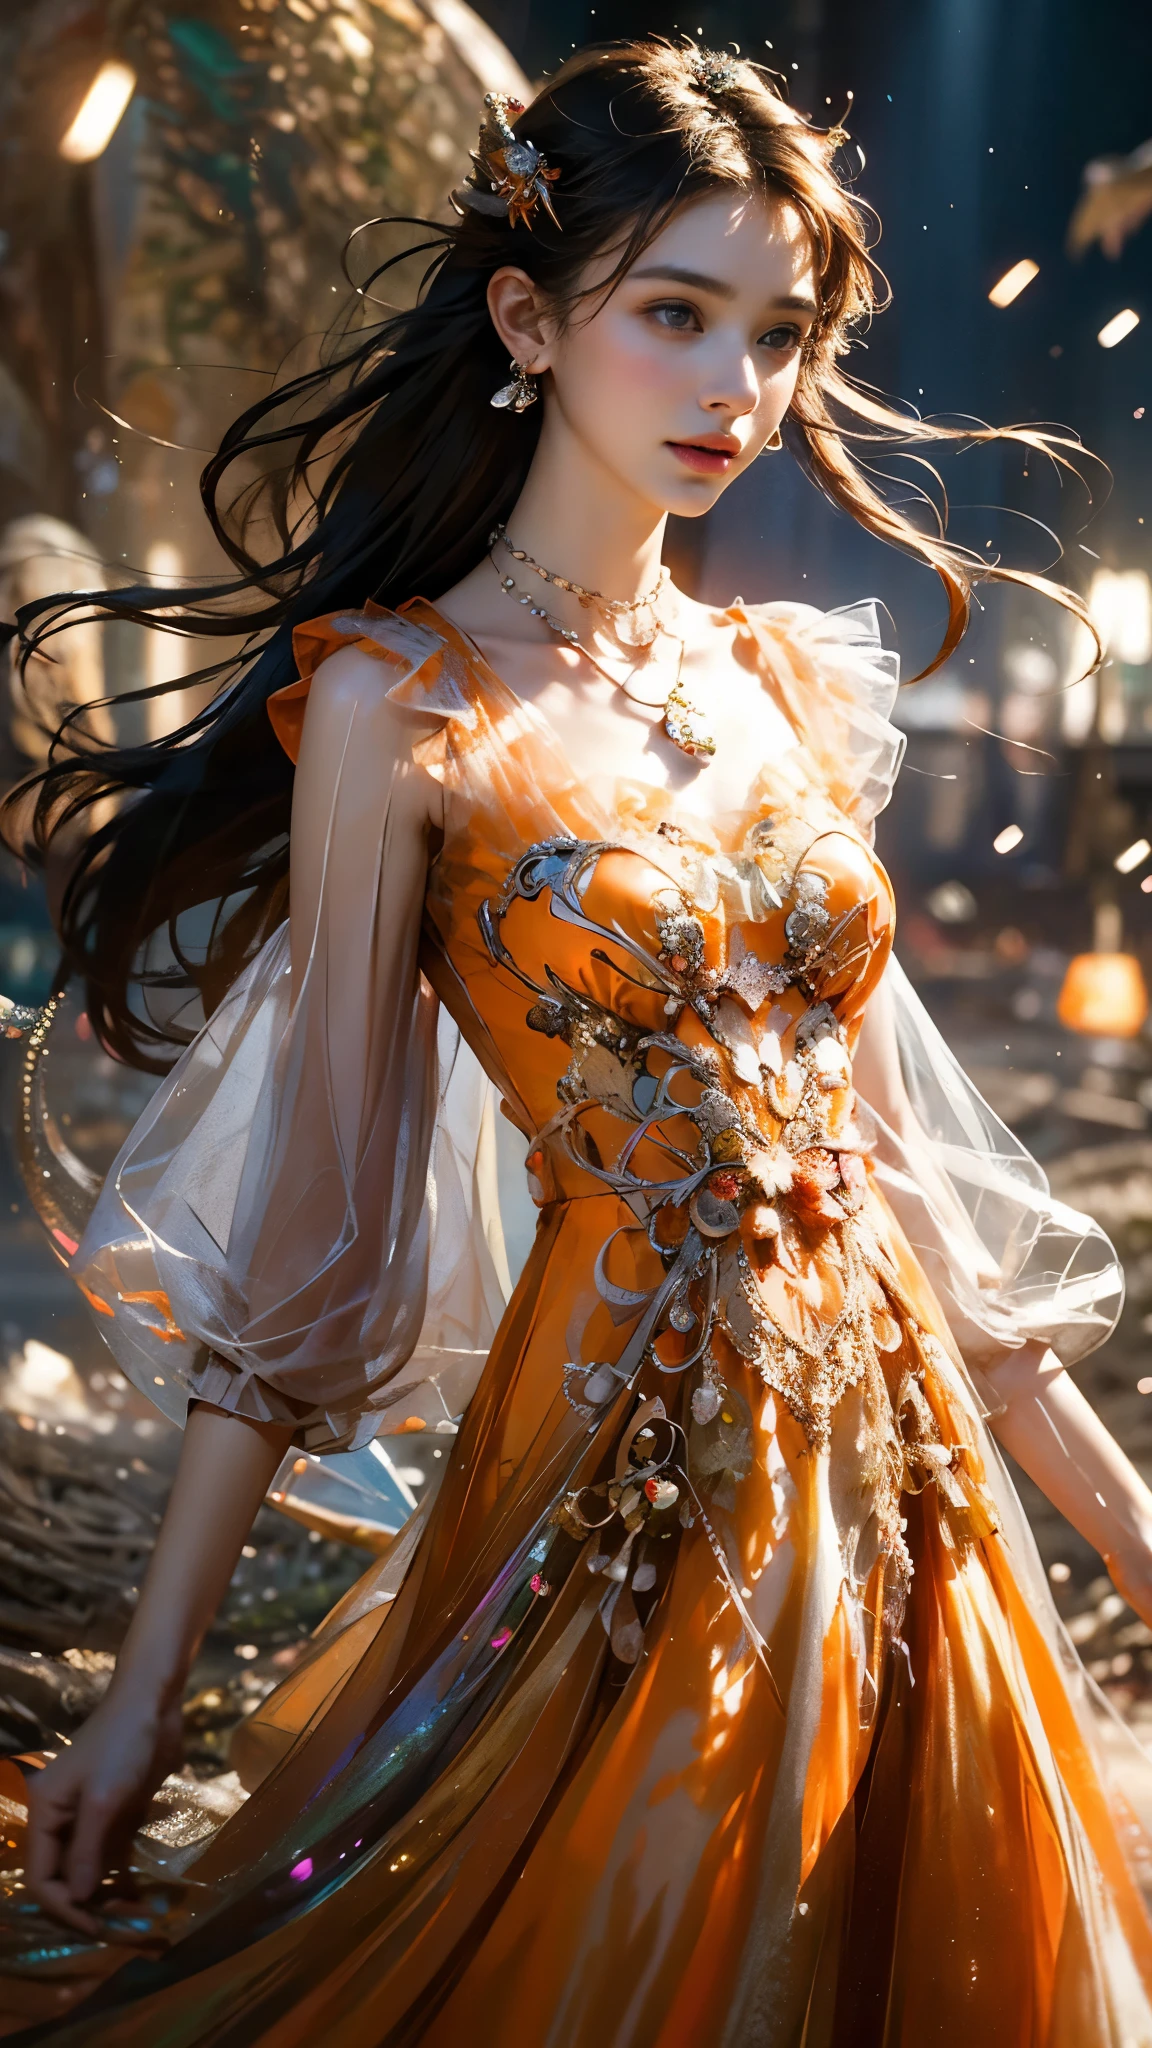 8K, ultra hd, masterpiece, 1 girl, (good face:1.4), detailed eyes, very long hair, impressive hairstyle, earings, necklace, small breasts, (orange dress:1.5), see-through, (fantasy dress:1.5) Light-colored foundation brings out the transparency of the skin, (in the wonderland:1.5), mystery, diwali lights, glowing lights, very decoration, The lights falls like water, perfect front body,